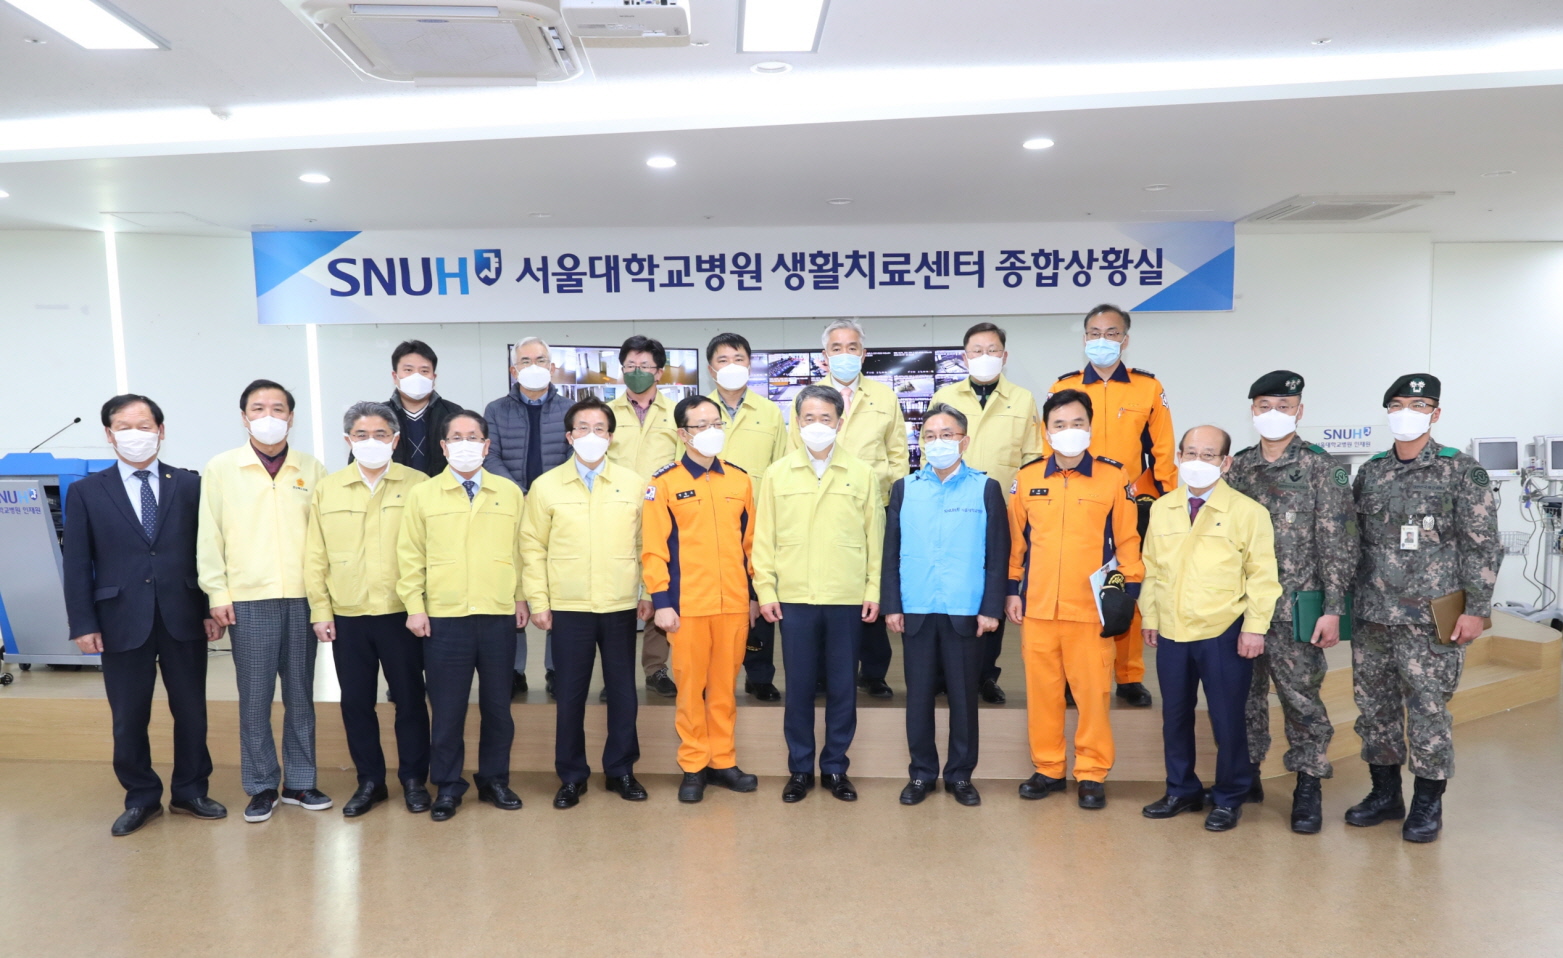 Park Neung-hoo, Vice Head 1 of the Central Disaster and Safety Countermeasures Headquarters, Attends the Opening Ceremony of the Gyeongbuk Daegu 3 Community Treatment Center (Mun-gyeong Seoul National University Hospital Training Center) 사진8